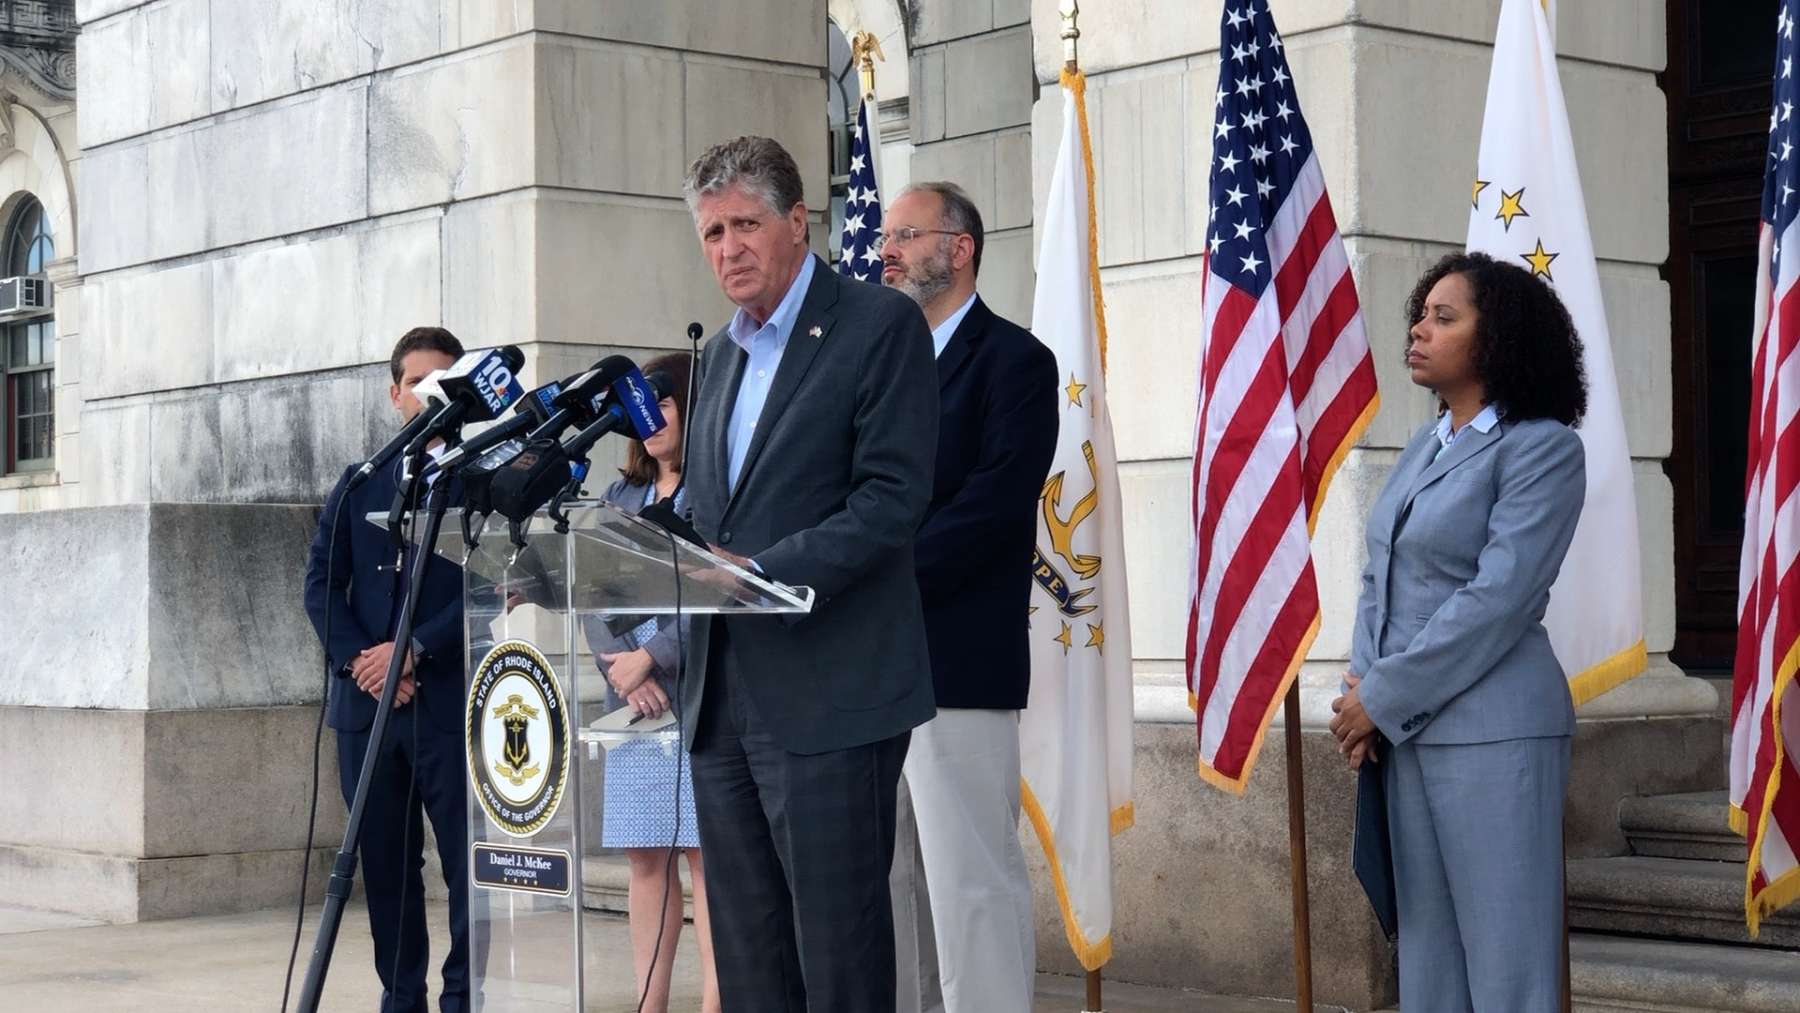 Rhode Island News: Asinof: What role do politically-connected consultants play in state funding?